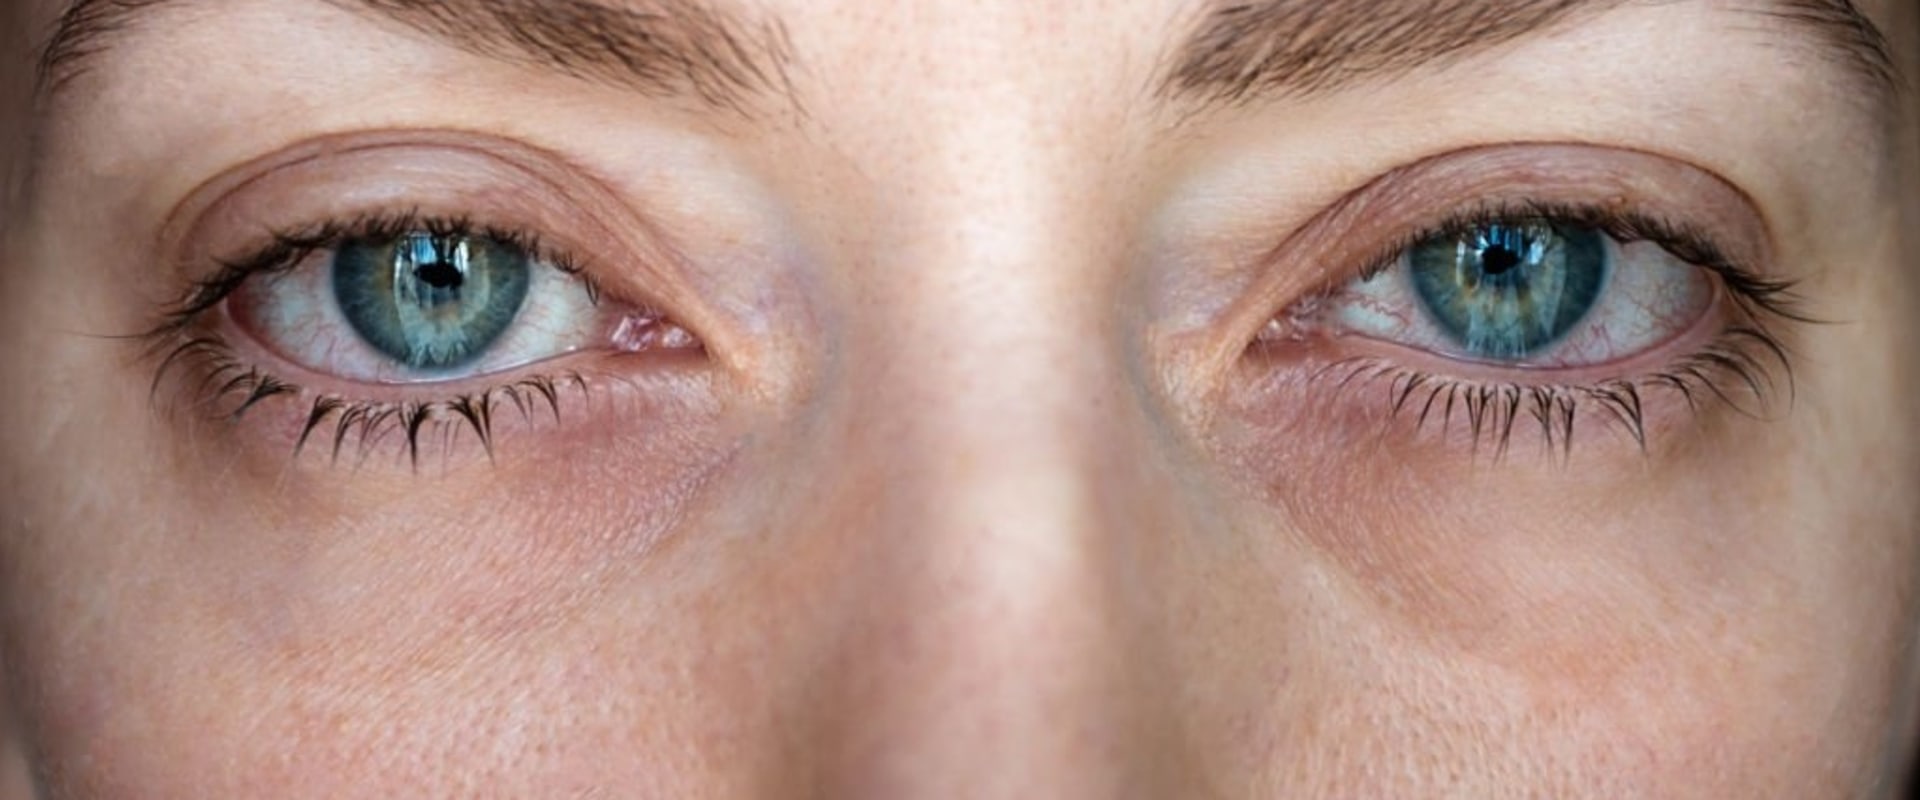 How do you know if your allergic to eyelash extensions?